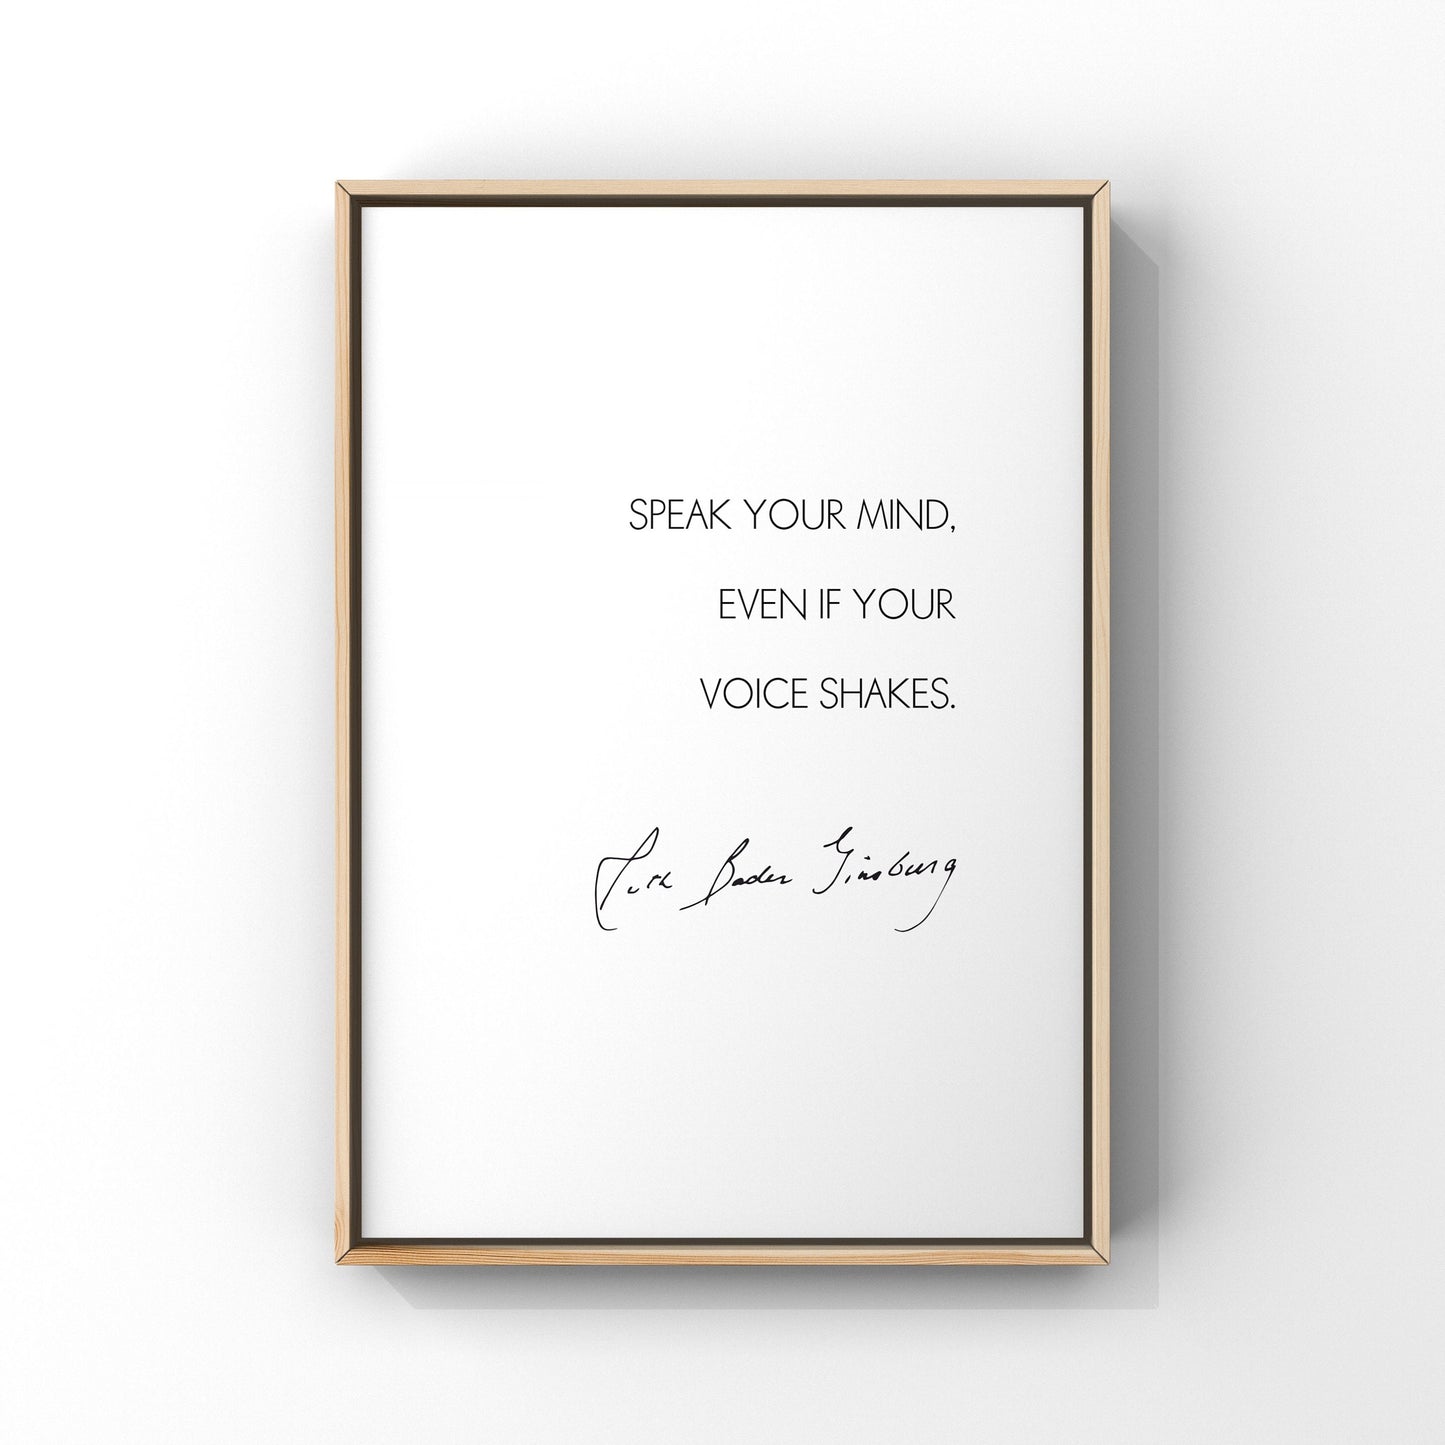 Speak your mind even if your voice shakes,Ruth Bader Ginsburg quote,RBG Wall Art Print sign,Inspirational print,Wall decor,Signature poster